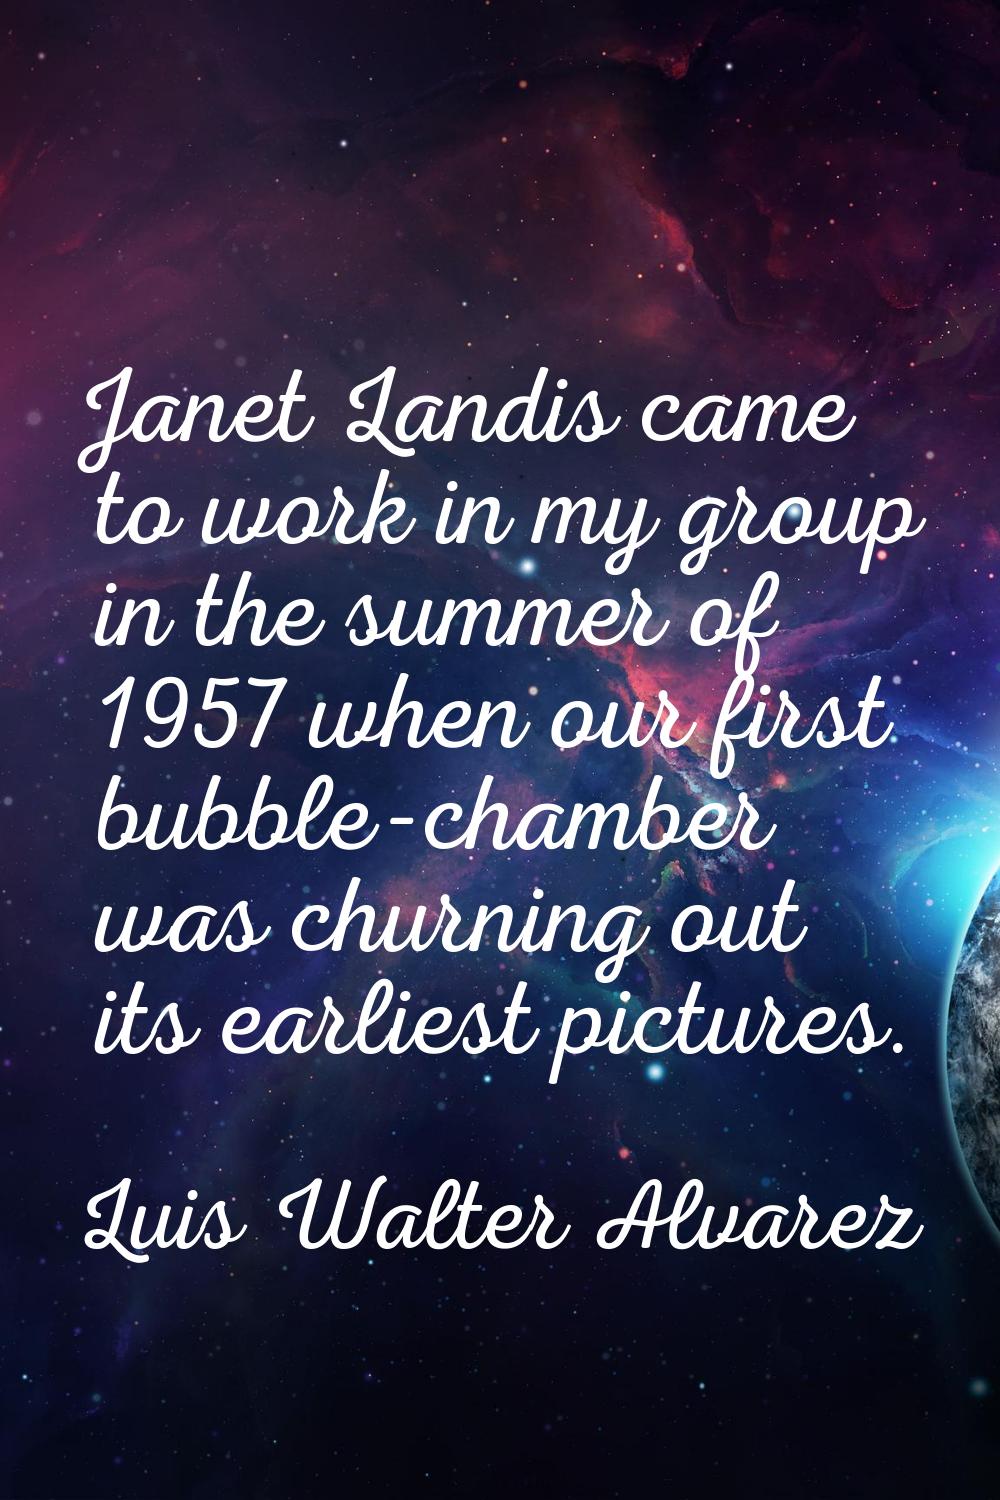 Janet Landis came to work in my group in the summer of 1957 when our first bubble-chamber was churn